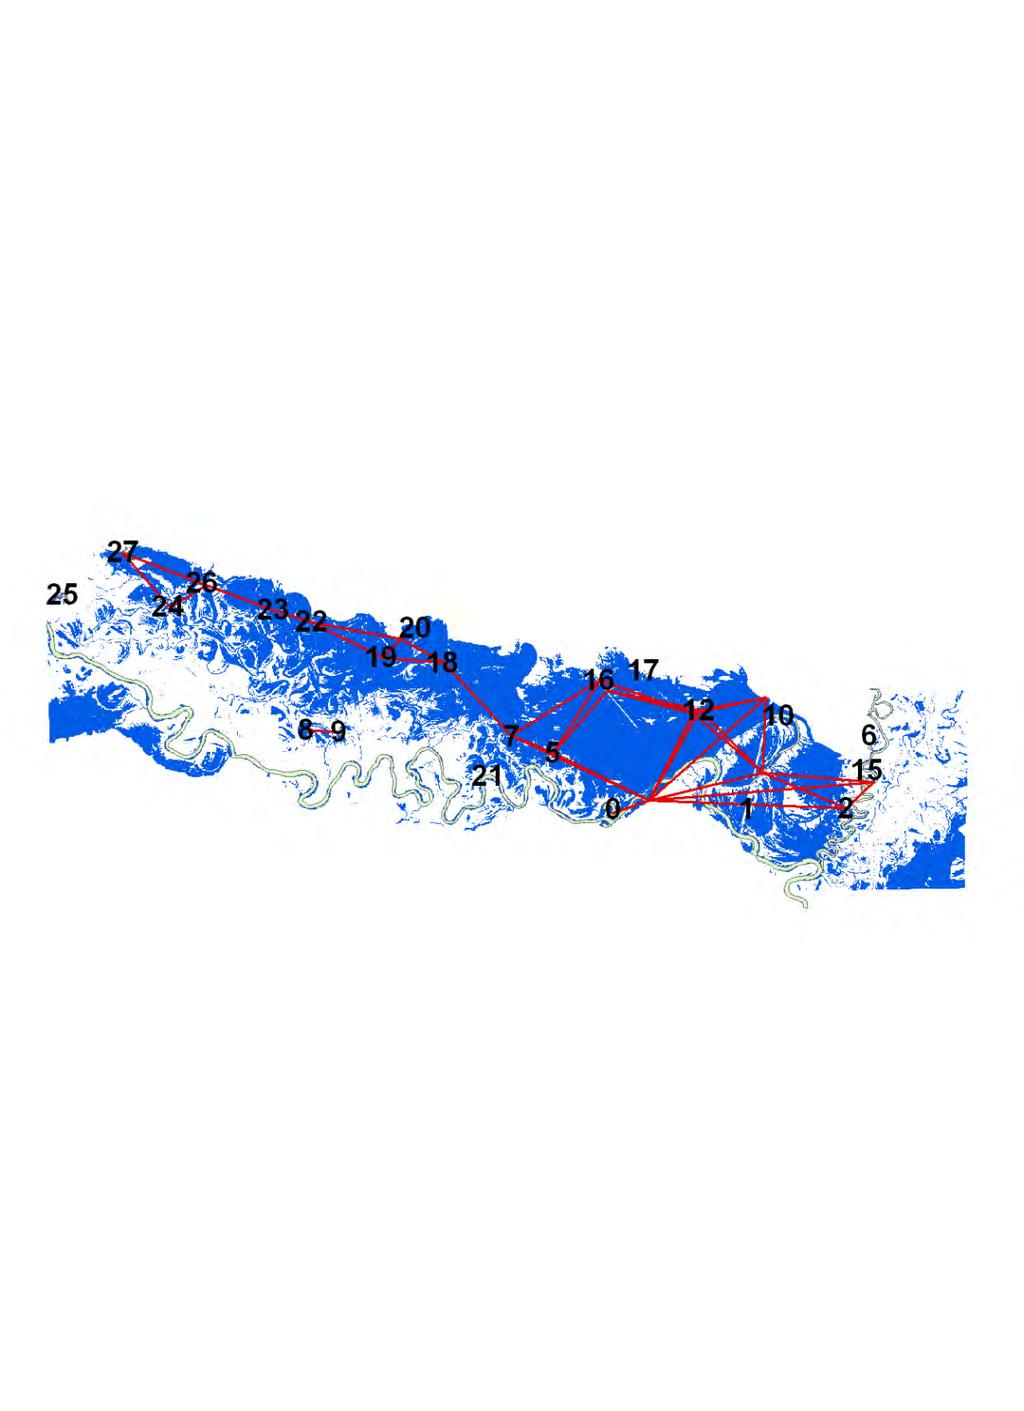 Flooding and Waterbody Connectivity # components: 16 Disconnected wetlands: 11 Ave. # of links: 0.